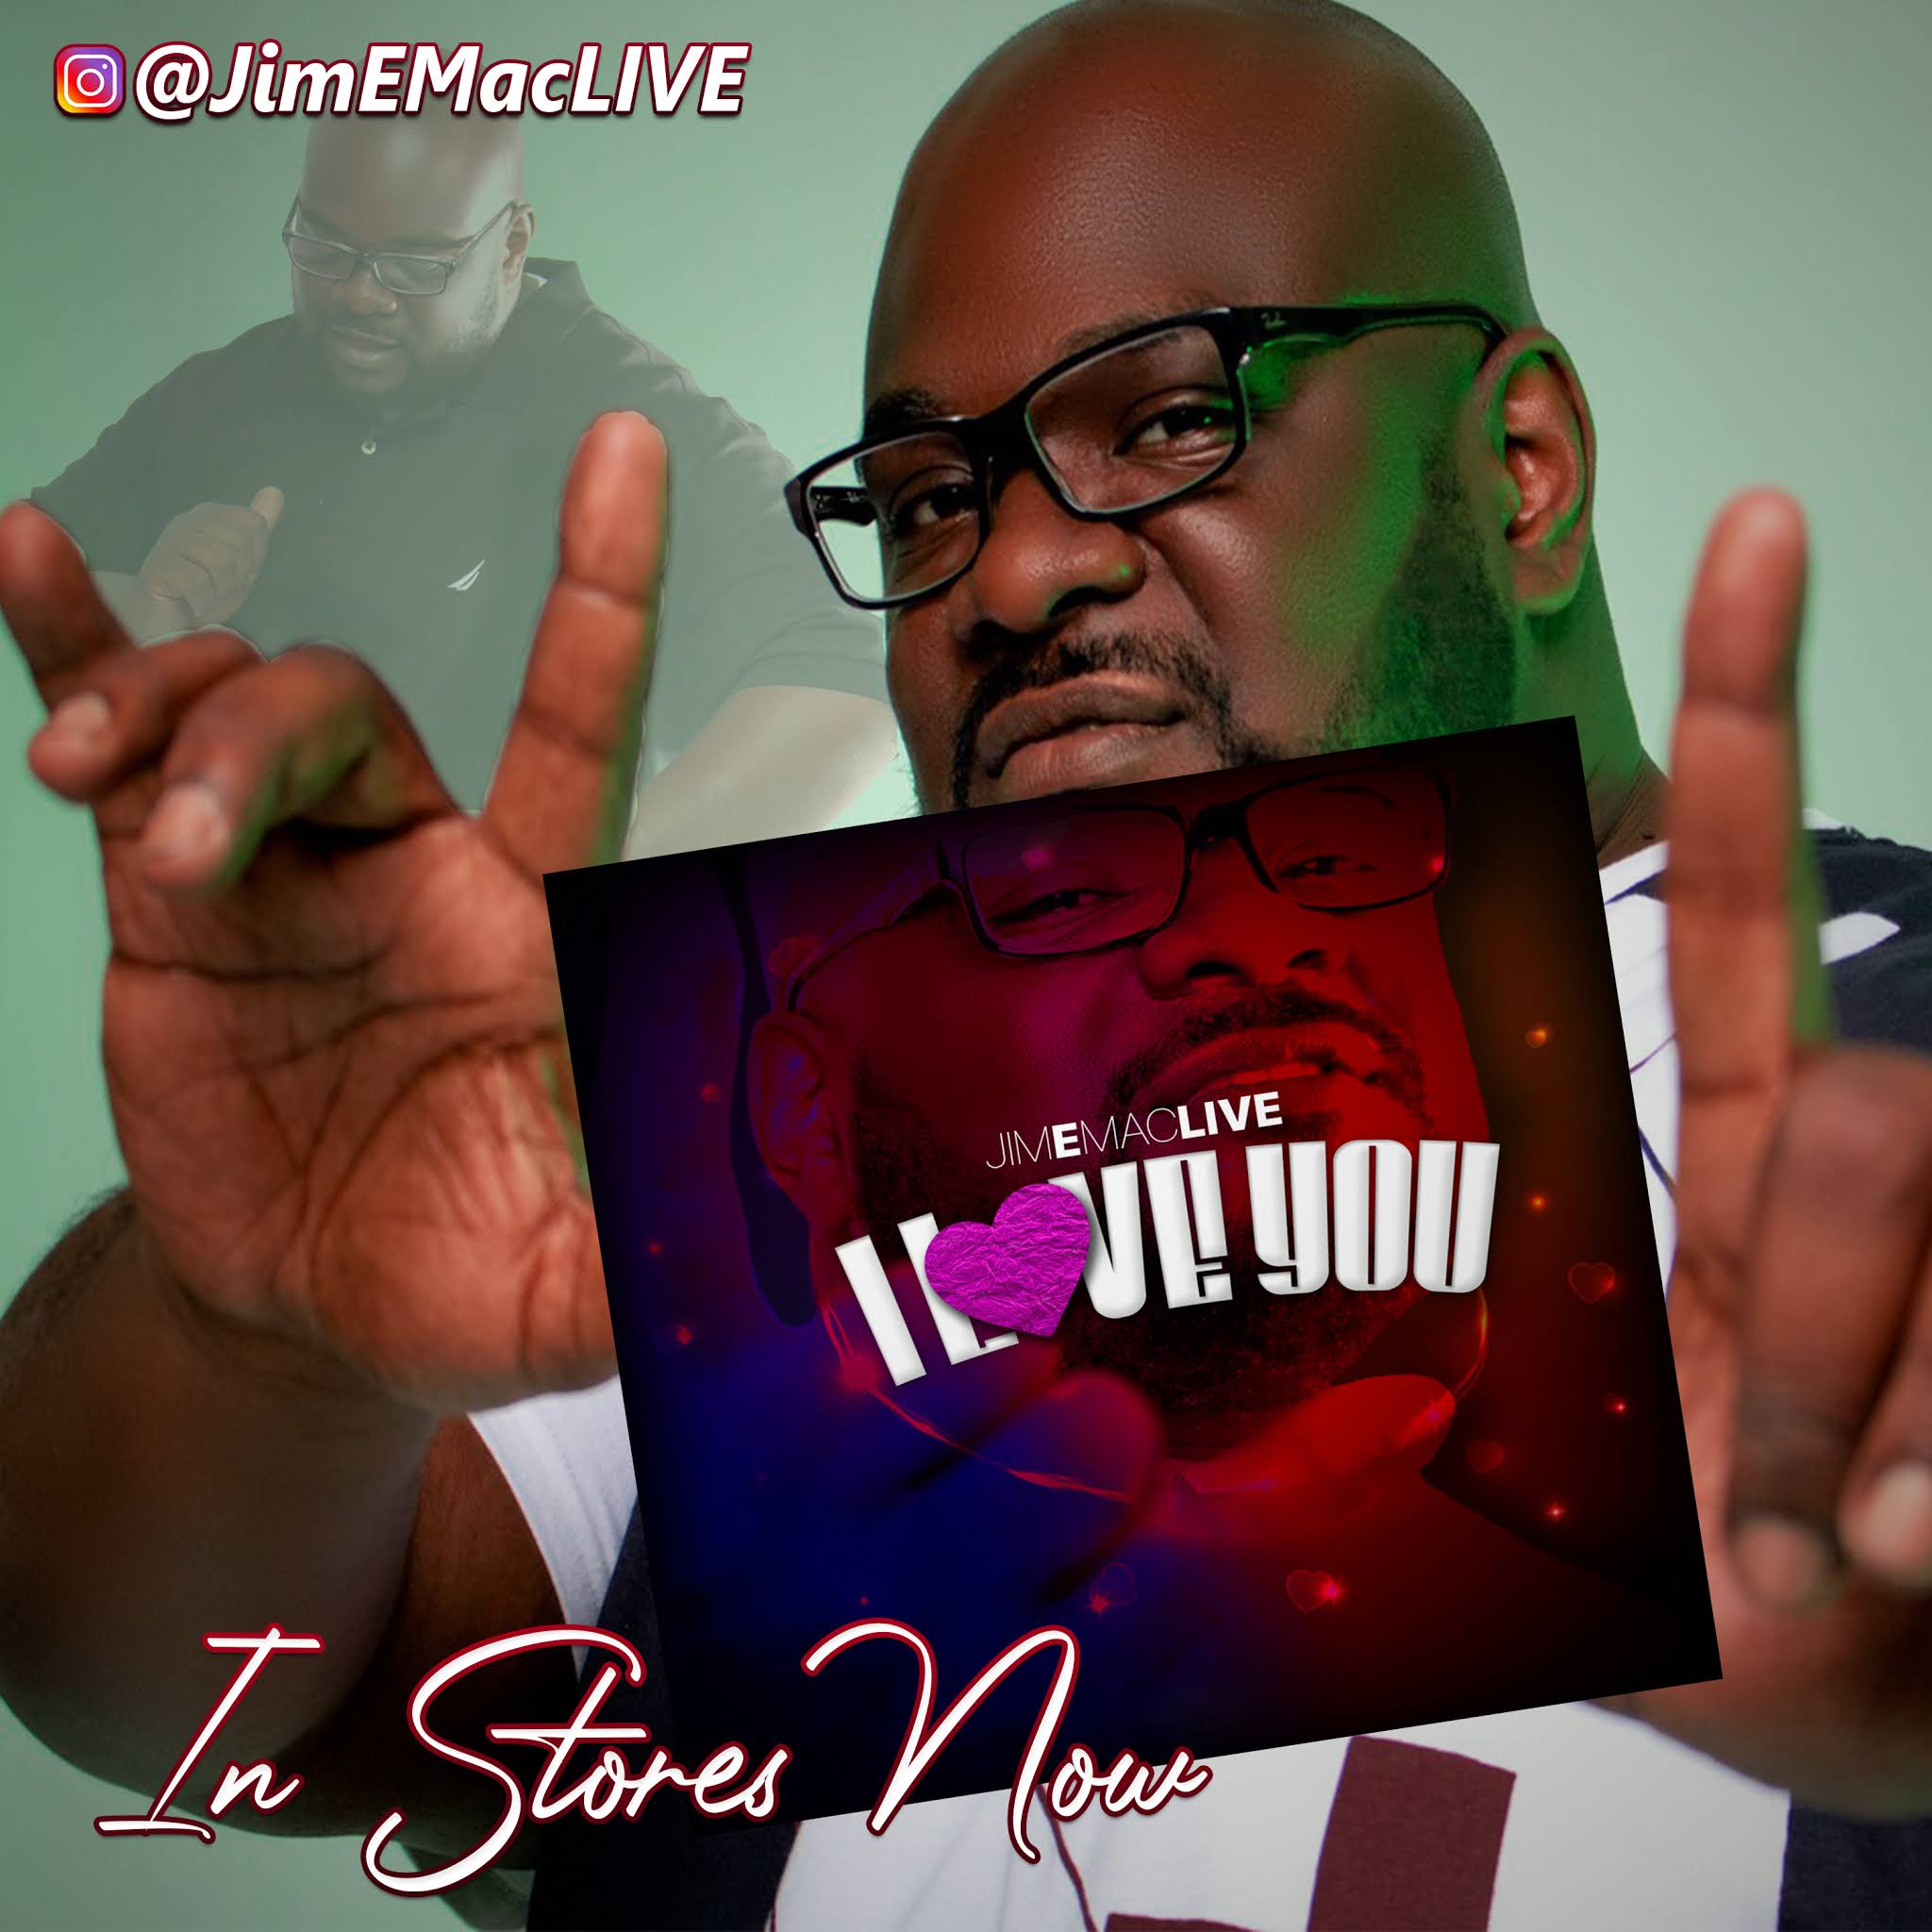 JIM E MACLIVE RELEASES NEW SINGLE "I LOVE YOU"